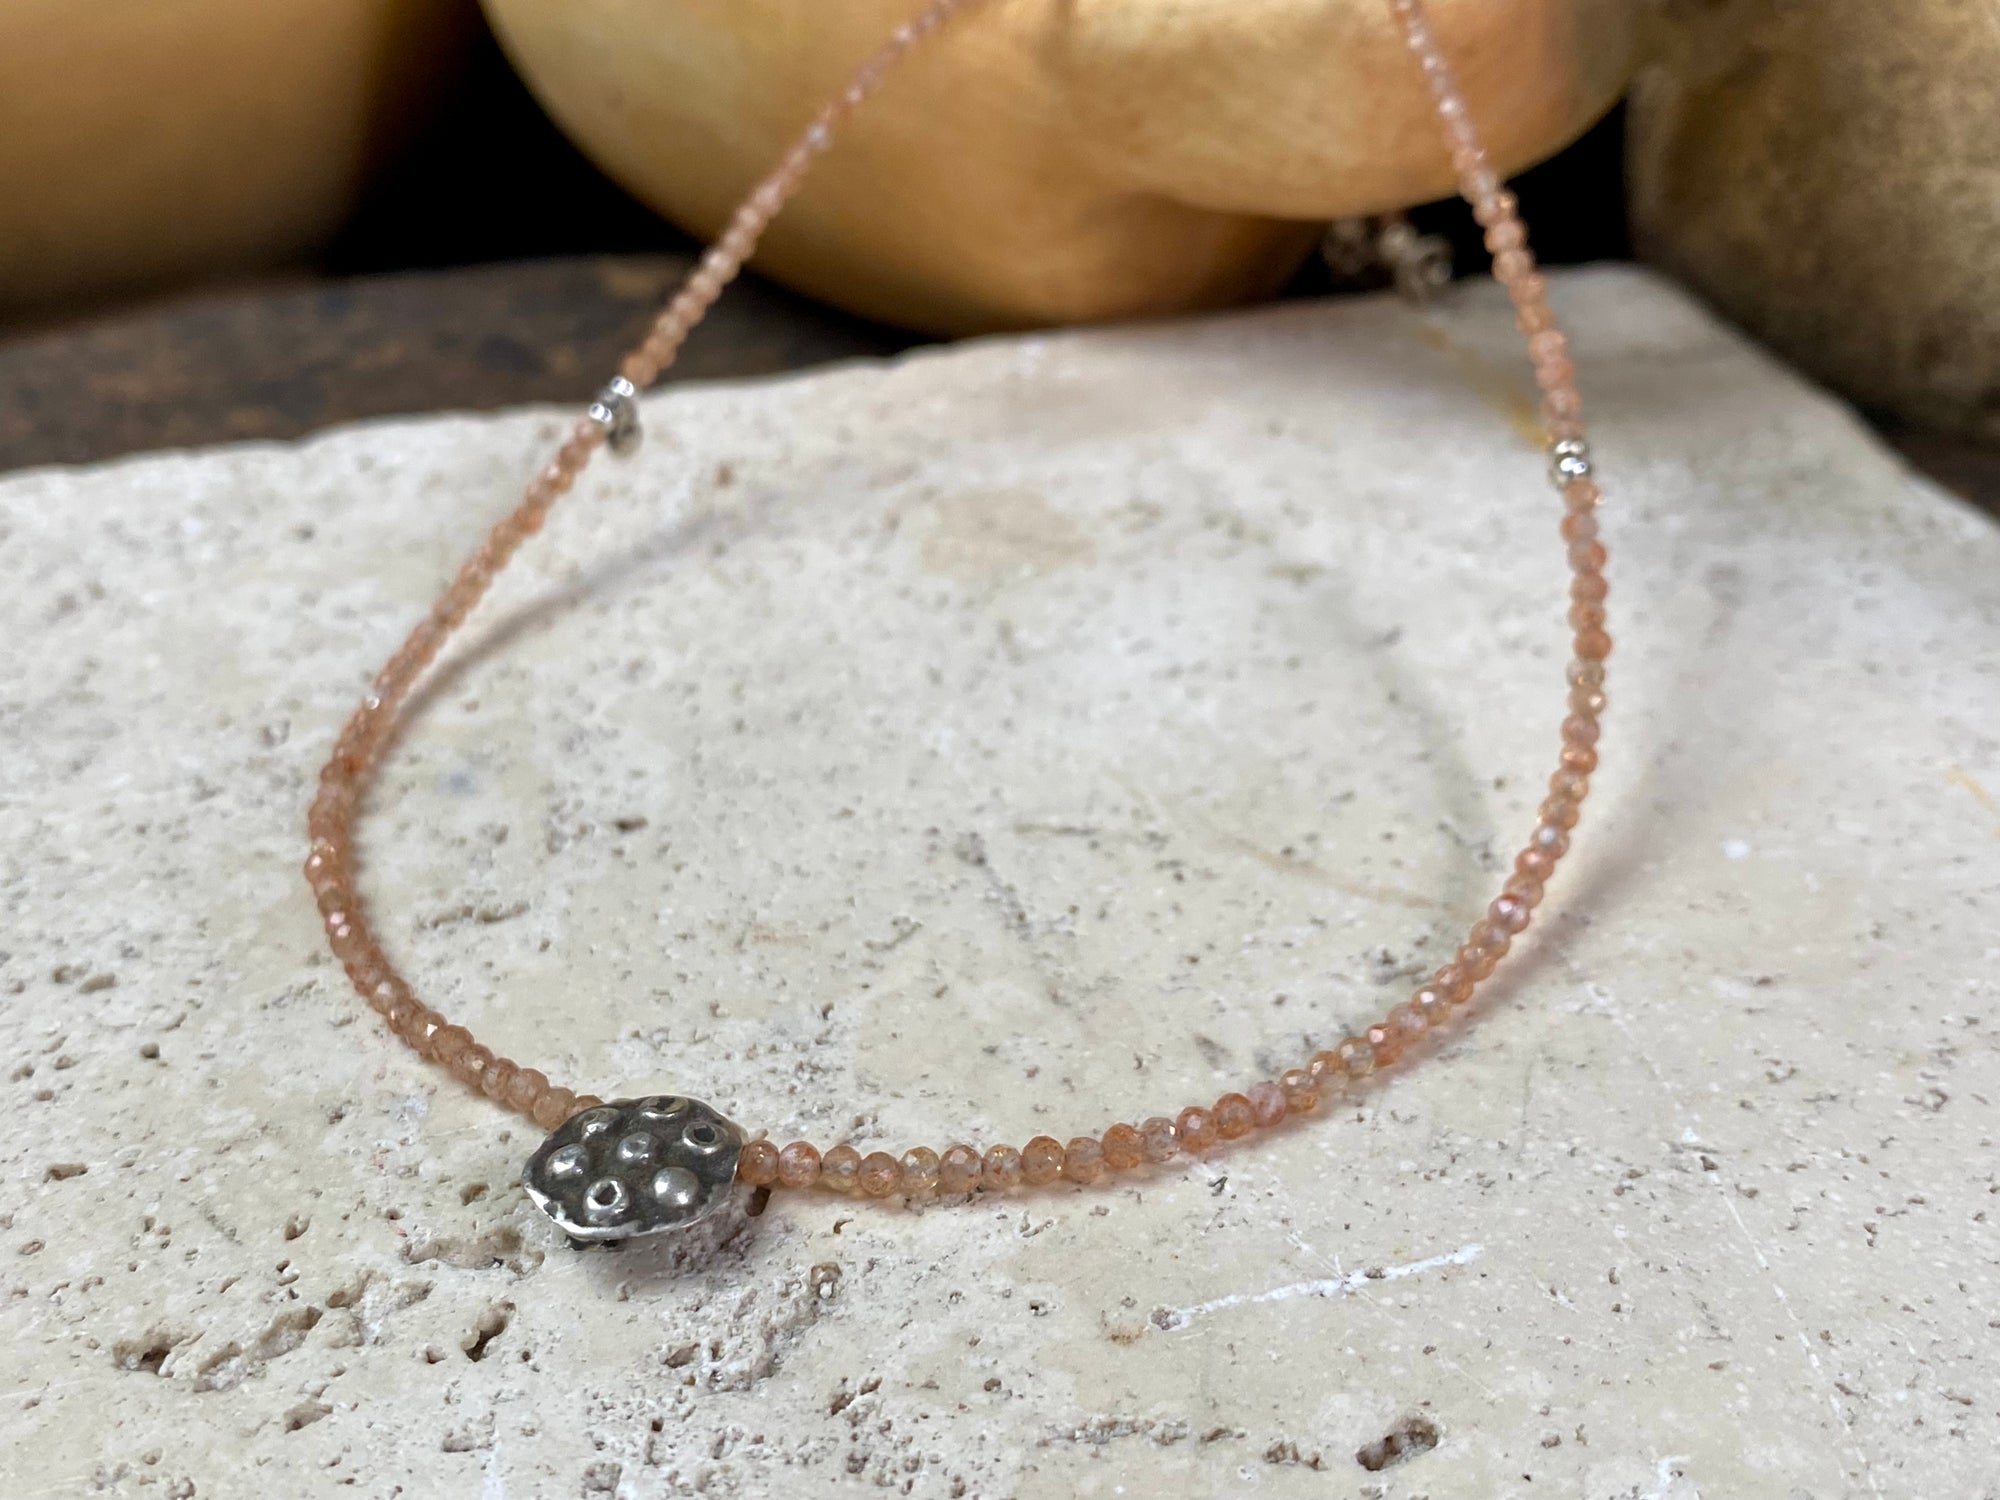 Natural clear pink/orange sunstone bead necklace with a beautiful old Indian silver pendant as the centrepiece. Silver bead detailing and a silver lobster clasp complete the look. Length 41.8 cm